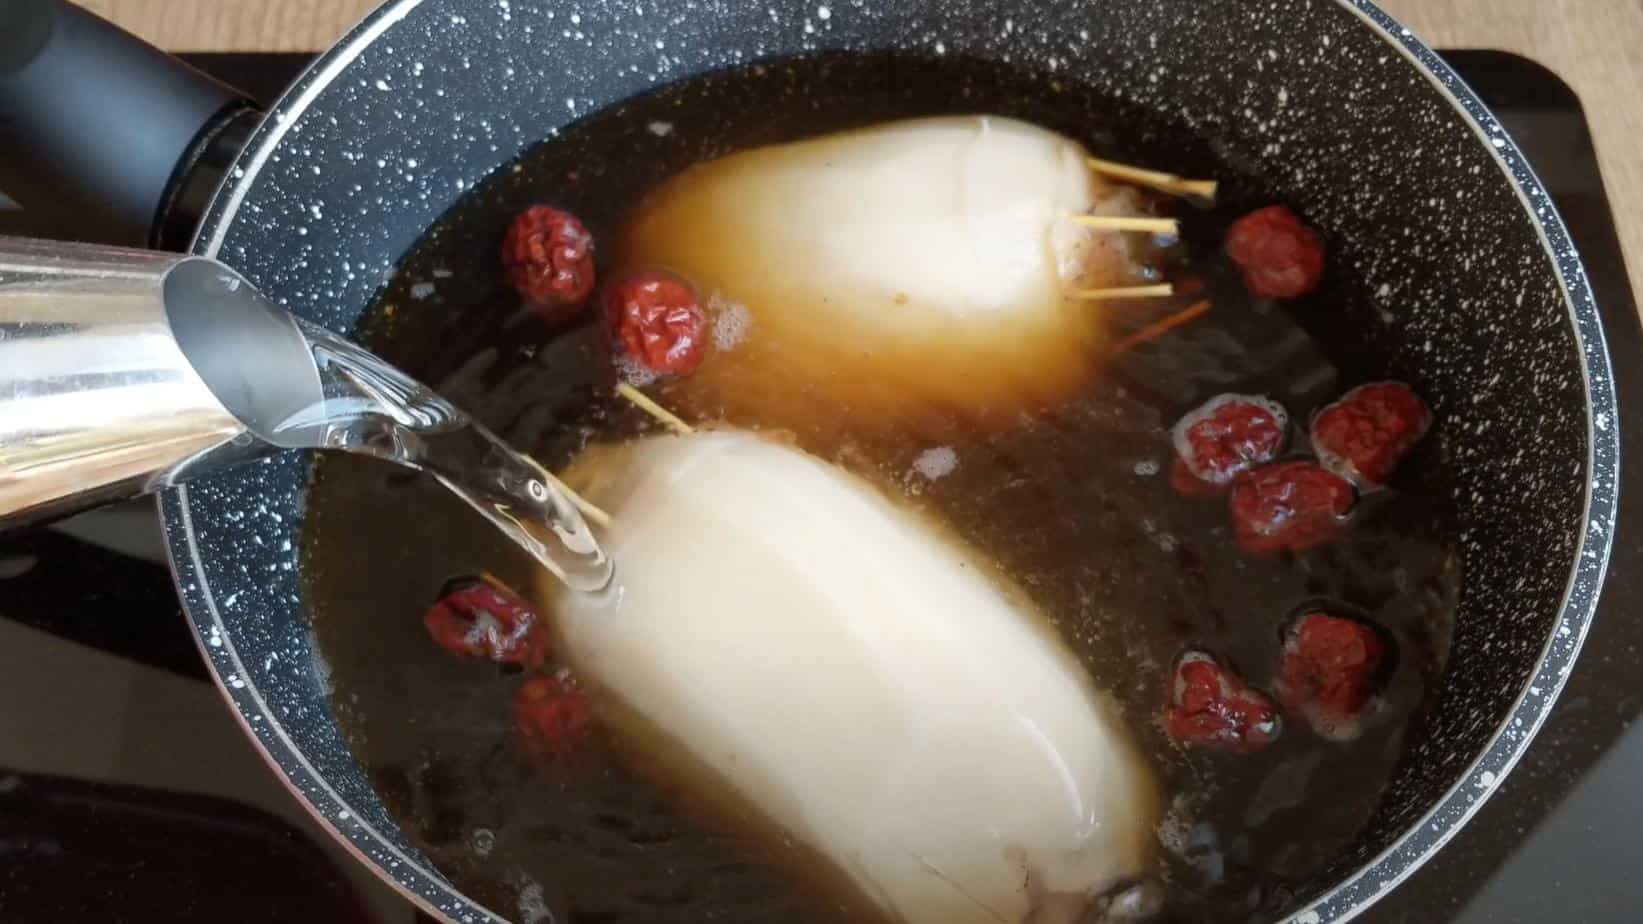 stuffed lotus rice and Chinese dates in sugary water